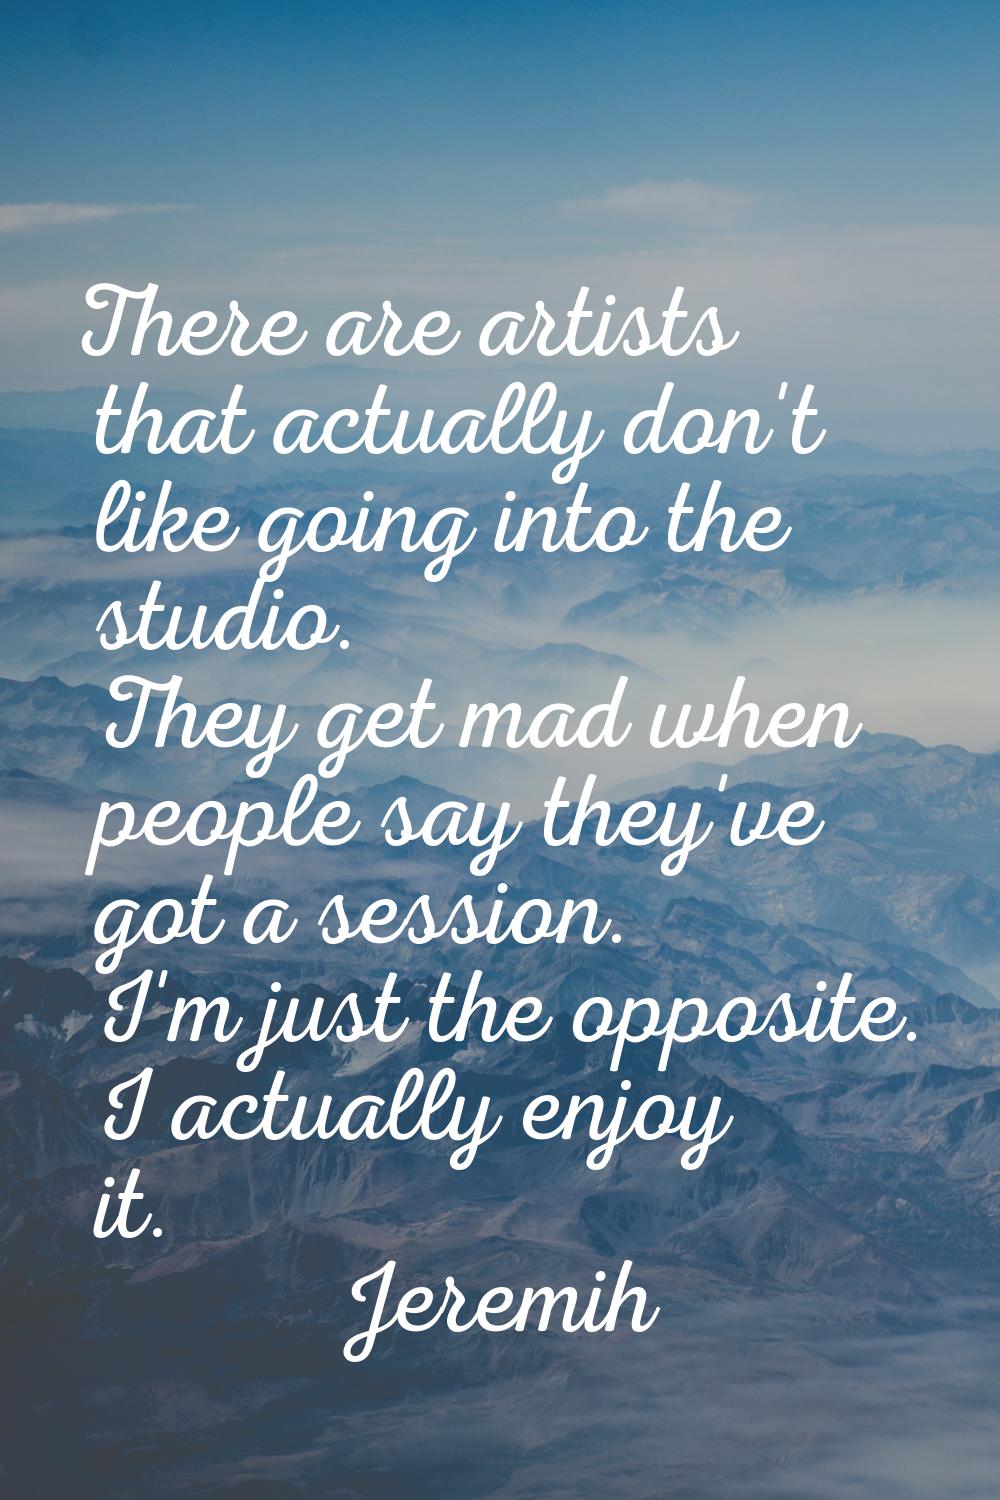 There are artists that actually don't like going into the studio. They get mad when people say they